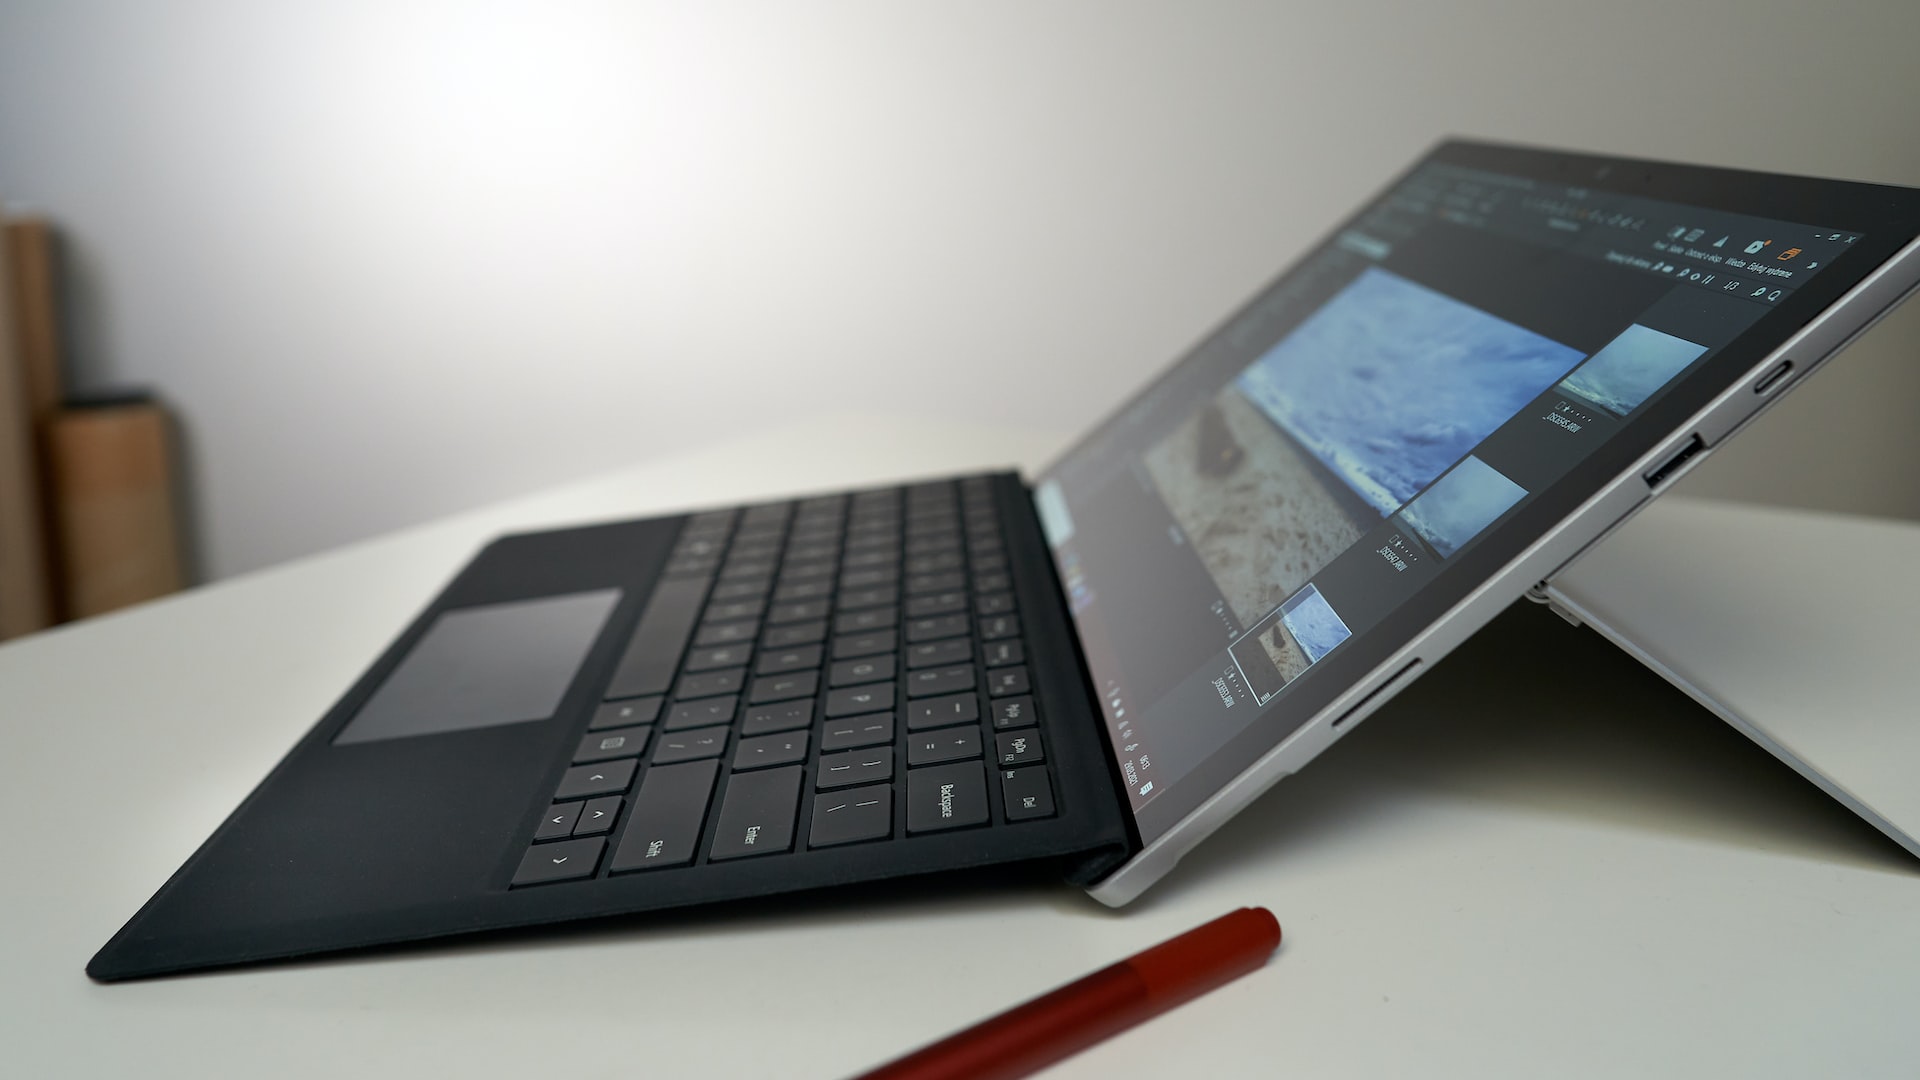 How Microsoft's Surface Pro Line Is Revolutionizing The Way We Use Devices